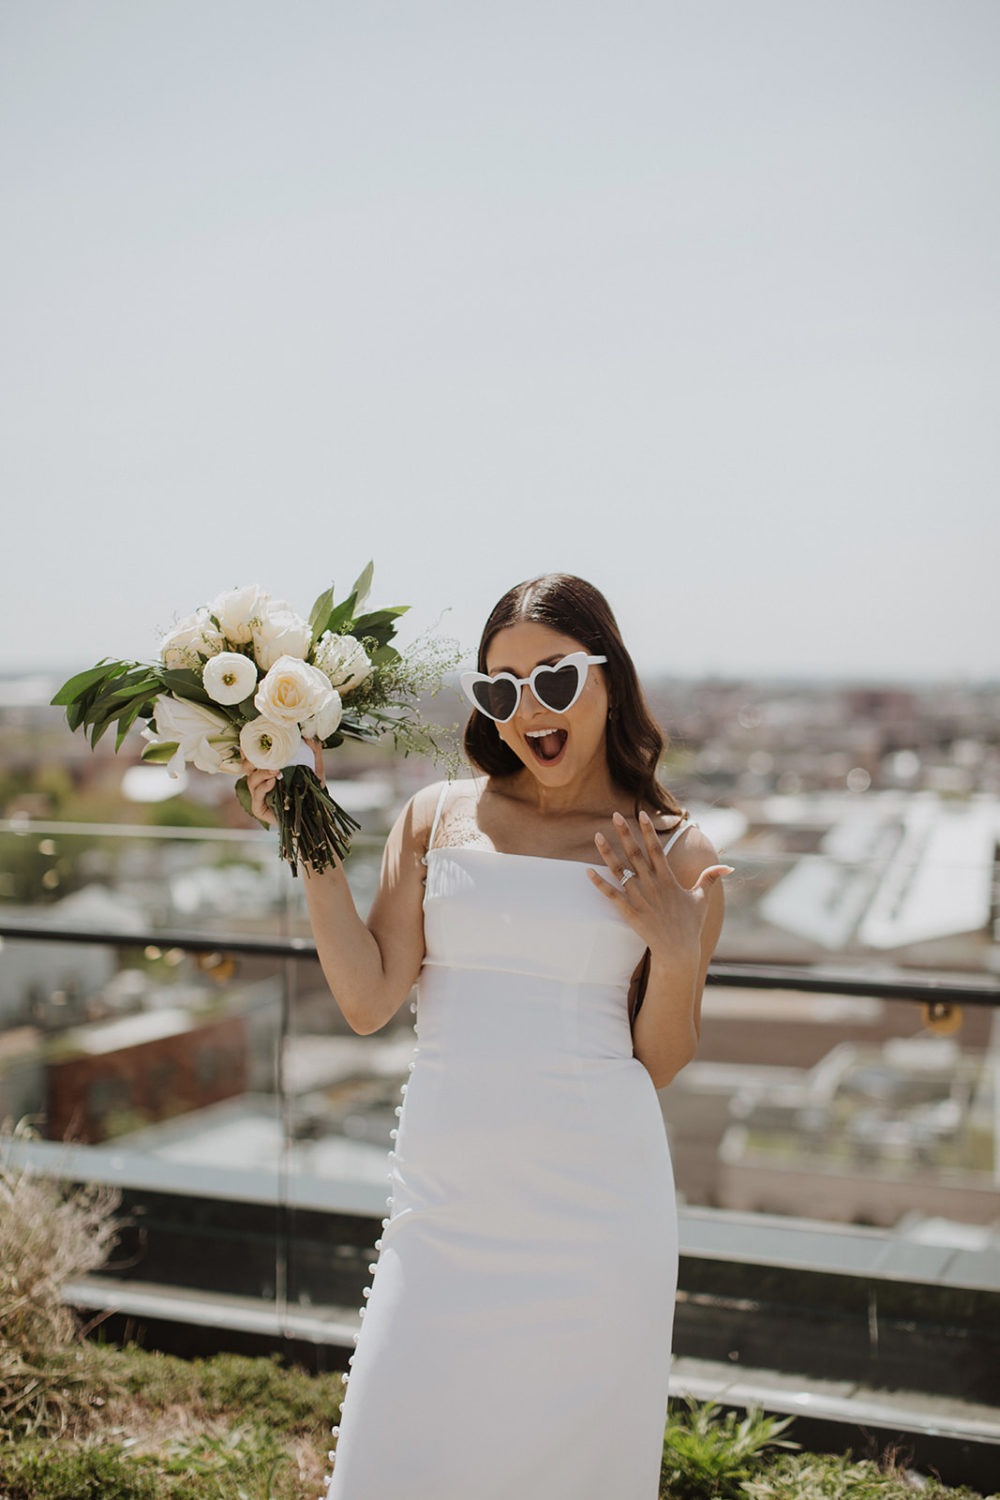 Bride shows of wedding band and wedding bouquet wearing sunglasses